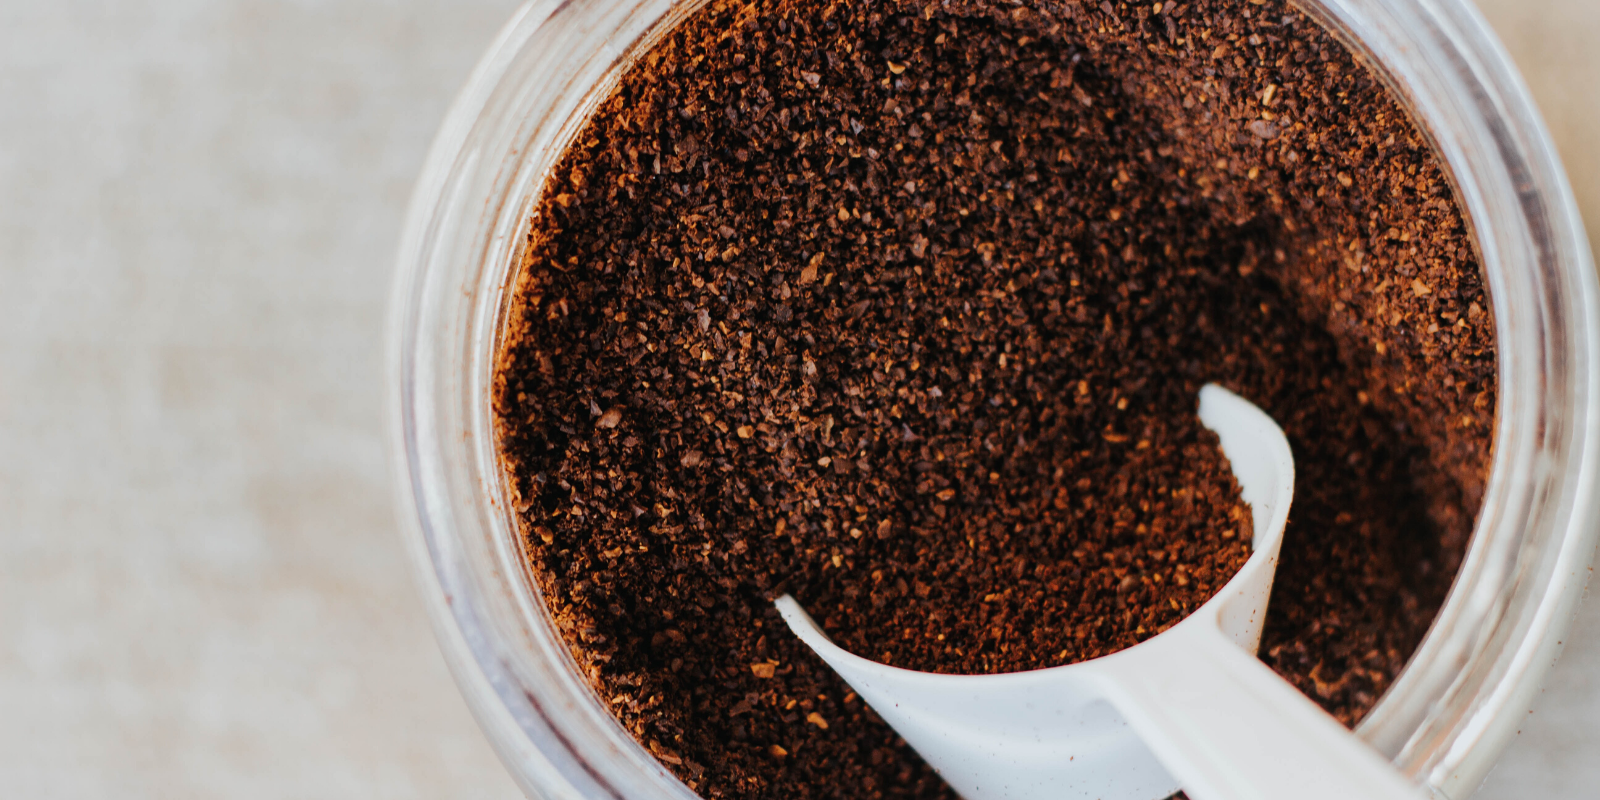 over exfoliating the skin. coffee grounds